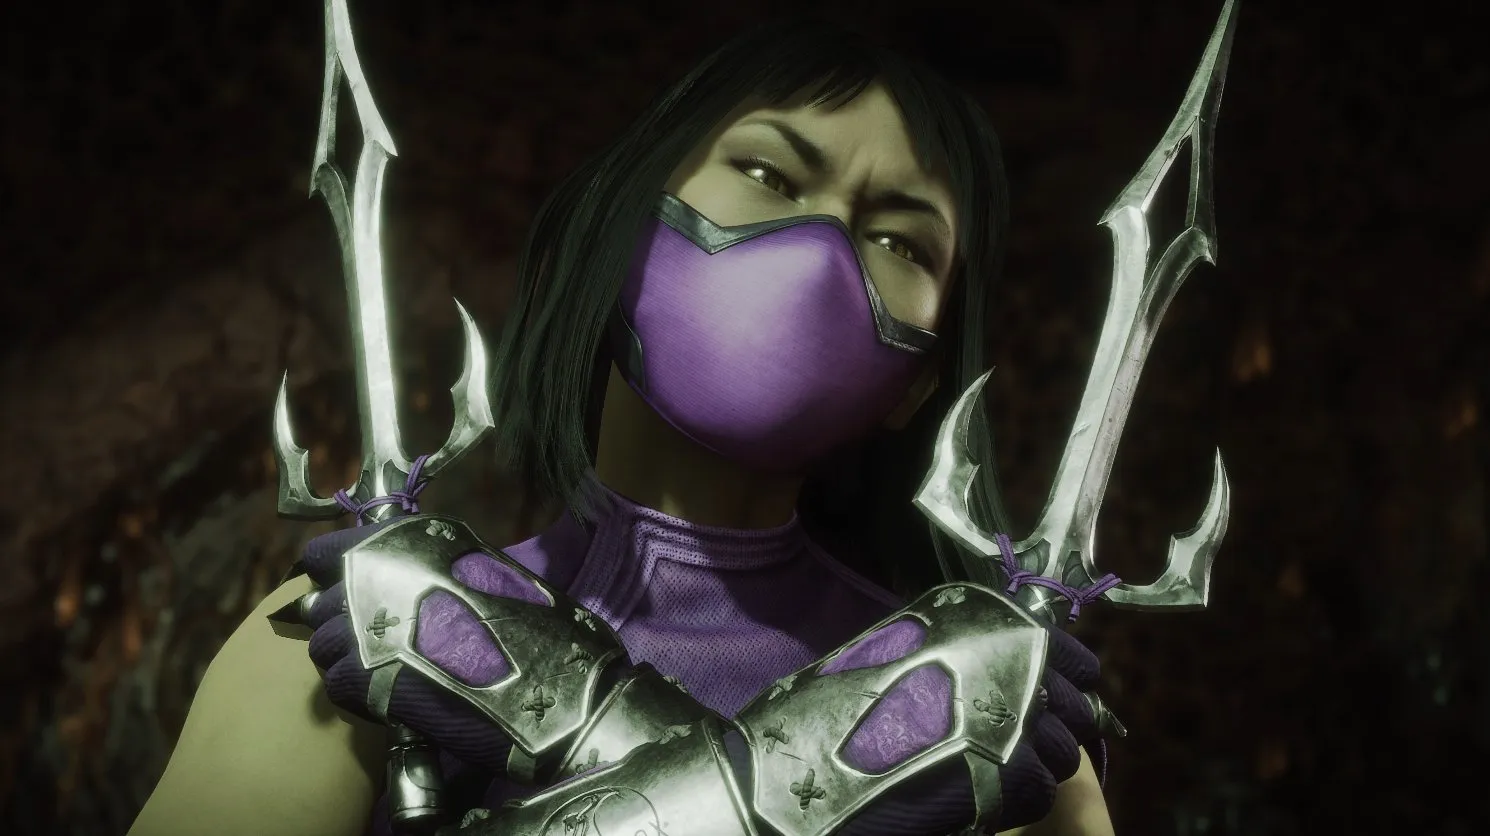 Mortal Kombat 11 is getting crossplay on PS4 and Xbox One